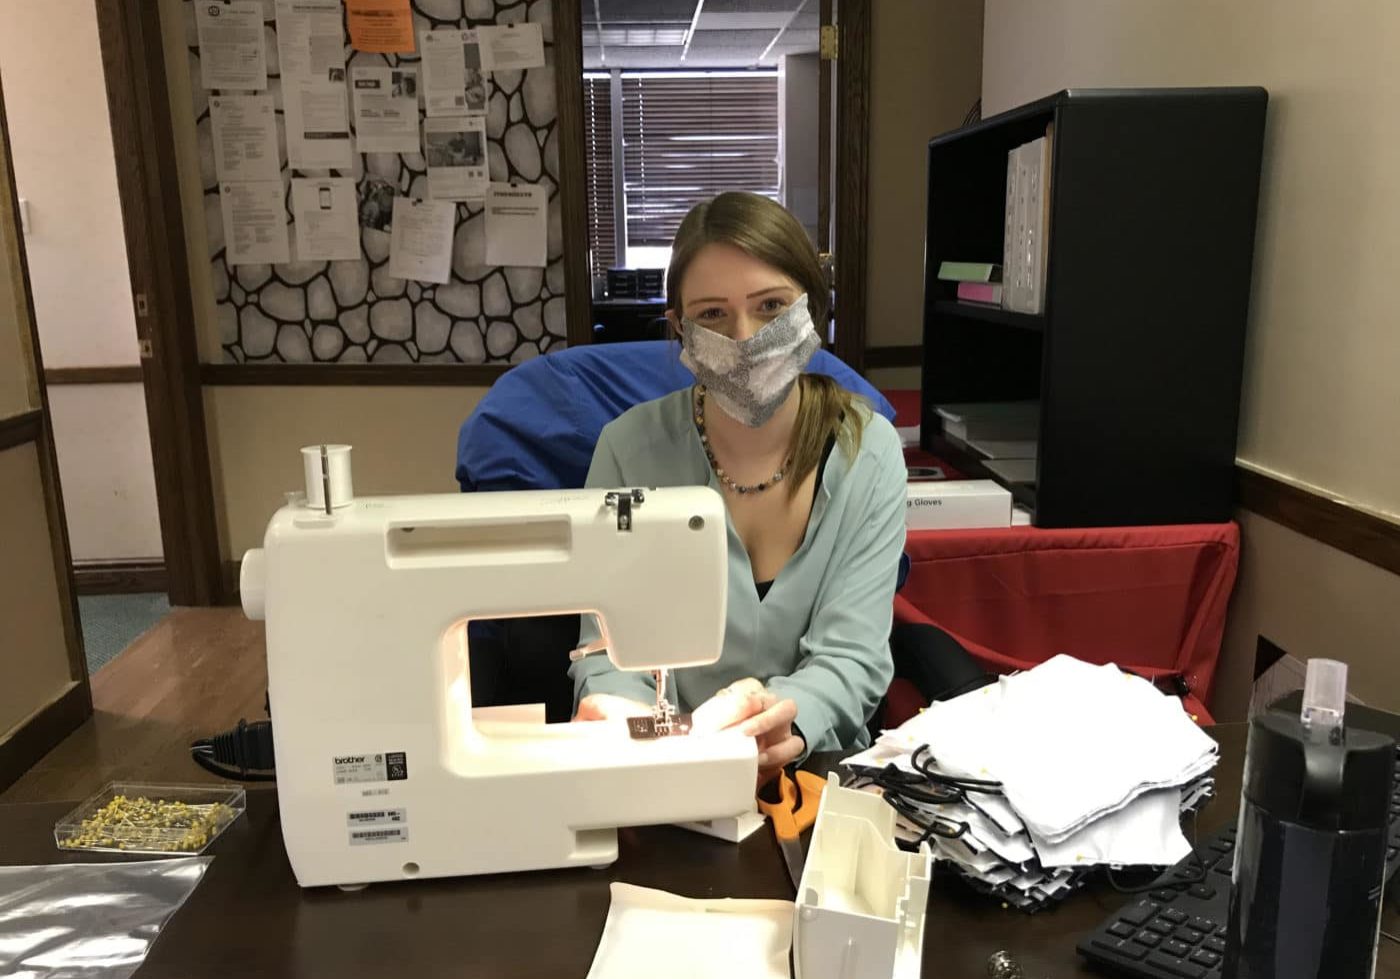 Brooke Smith, the new Administrative Assistant in Washington, PA at her sewing machine sewing masks